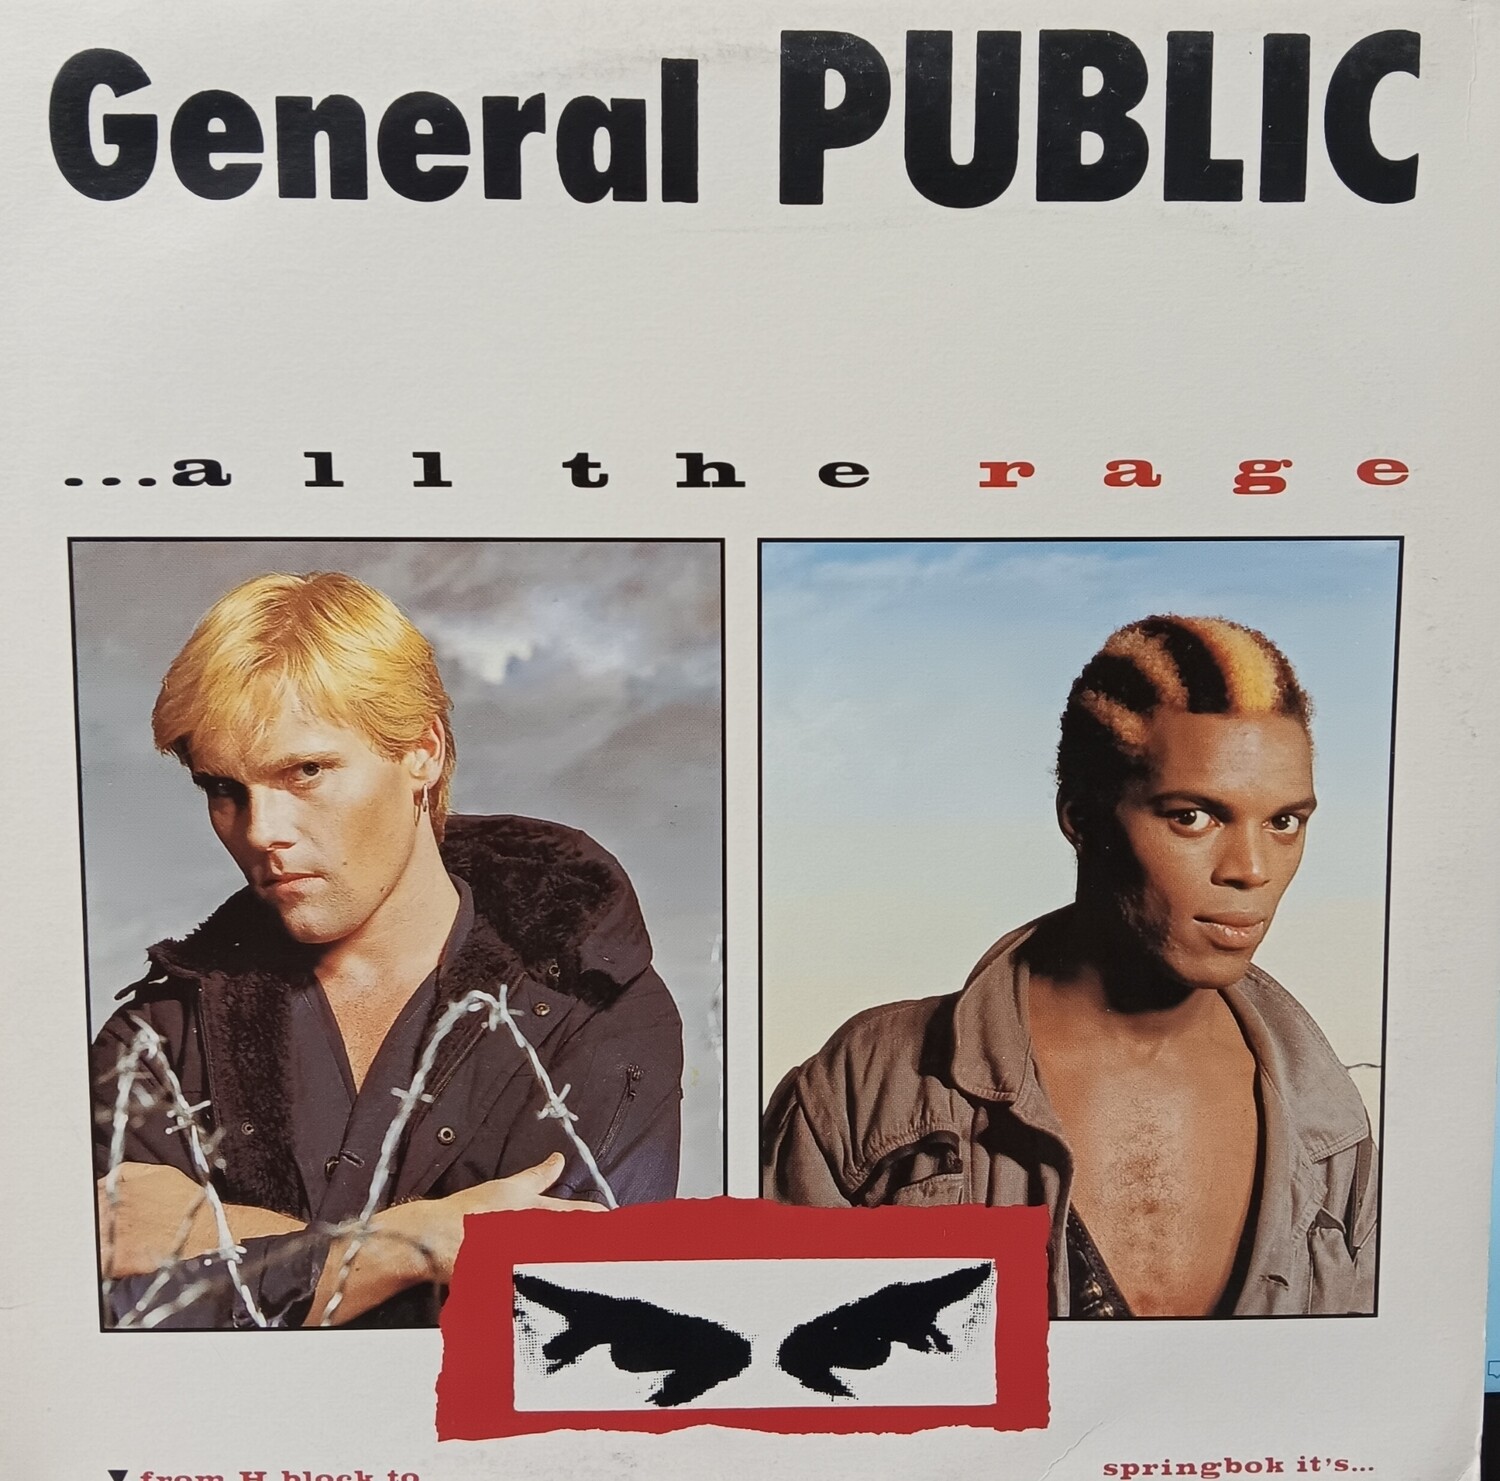 GENERAL PUBLIC - All the rage